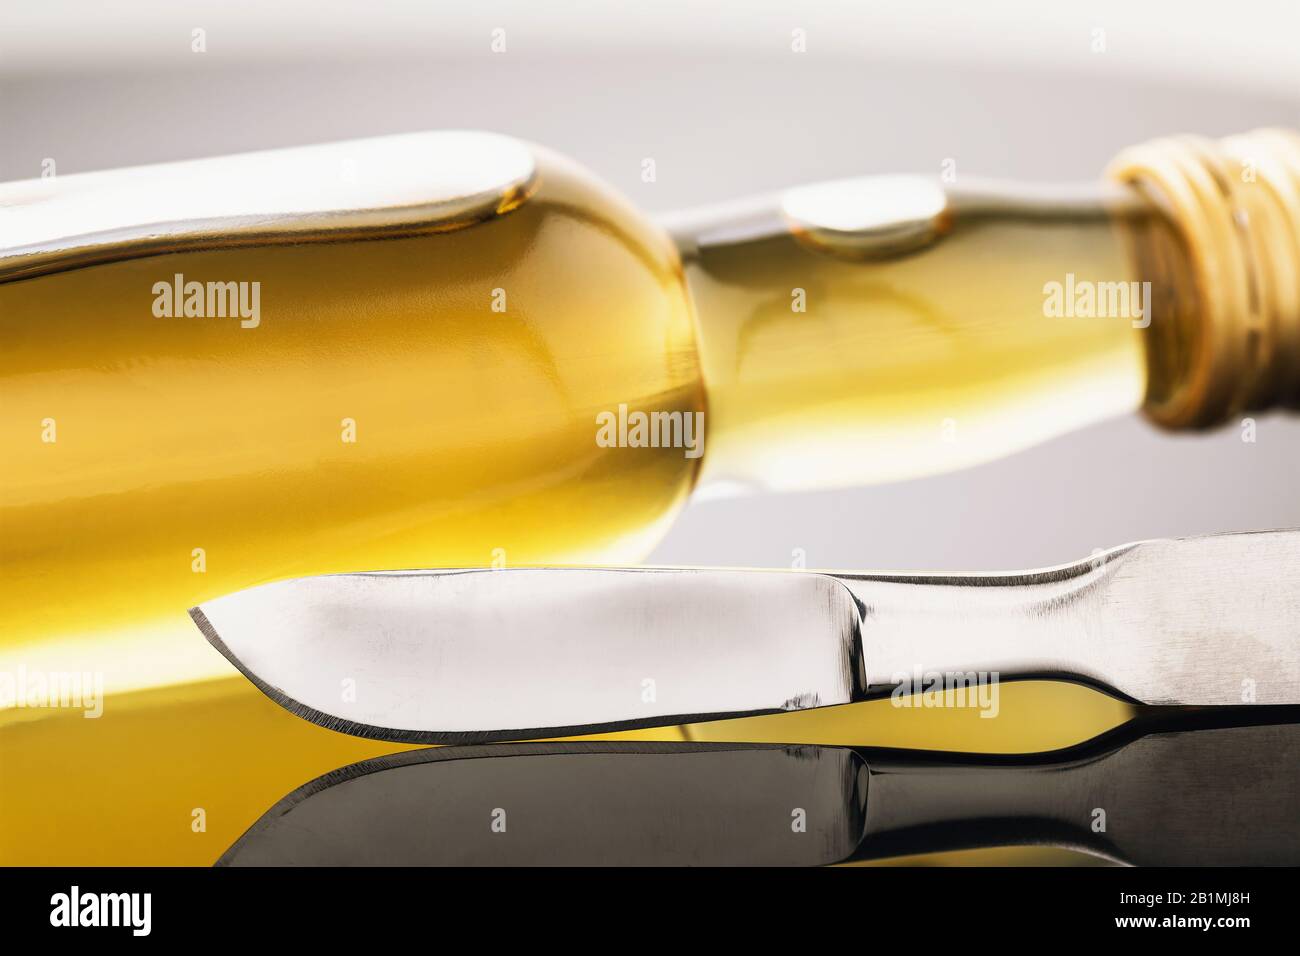 Scalpel and a bottle of whiskey on the table, closeup. Concept of alcohol abuse by doctors Stock Photo